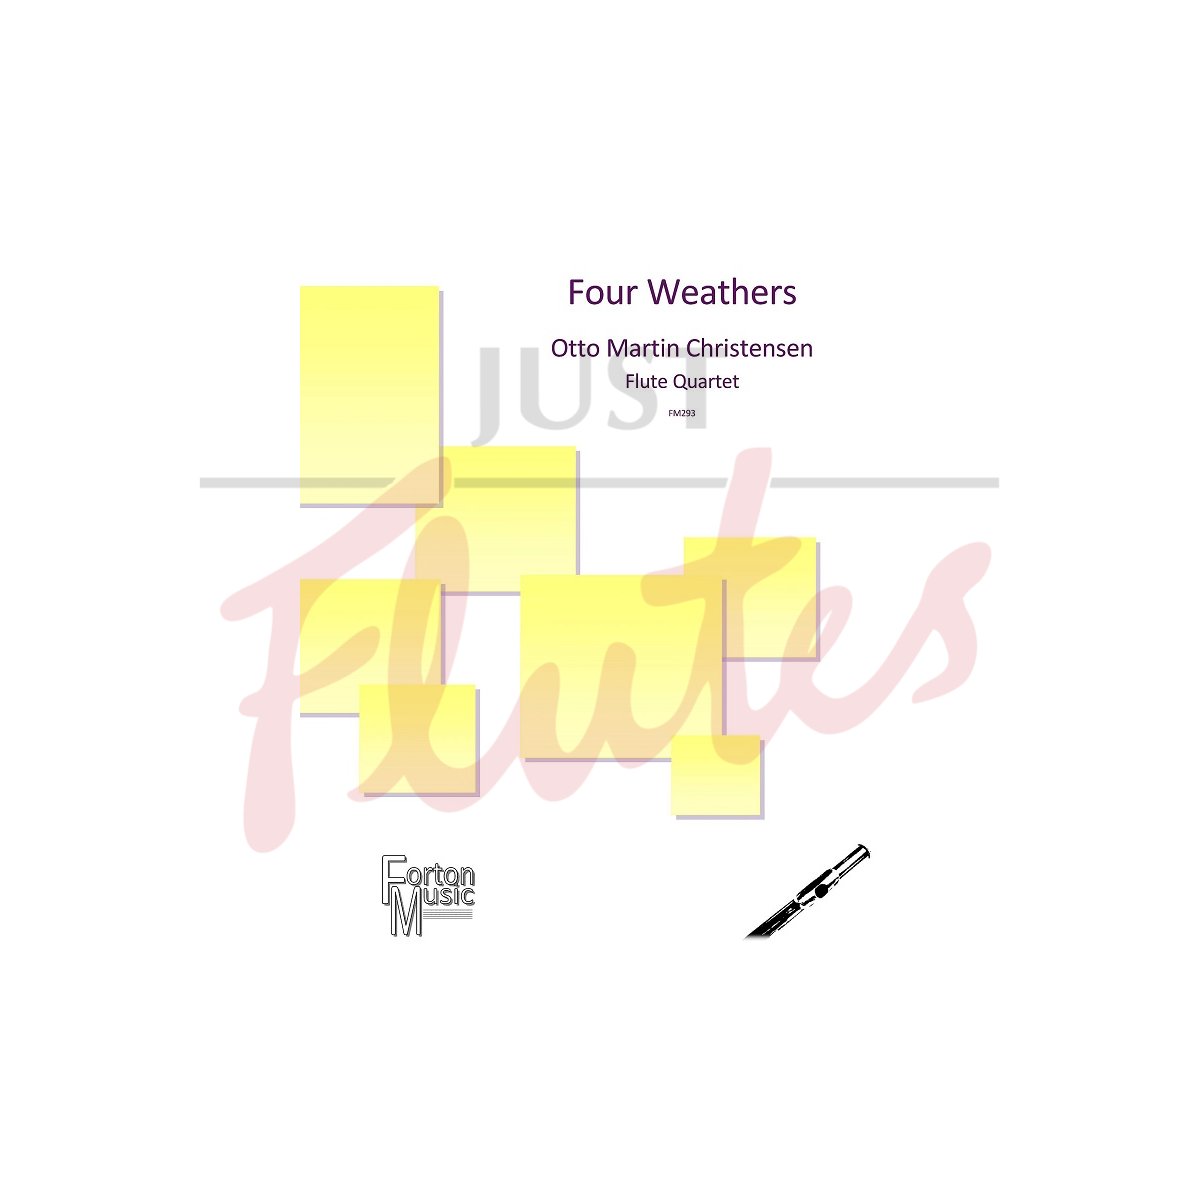 Four Weathers